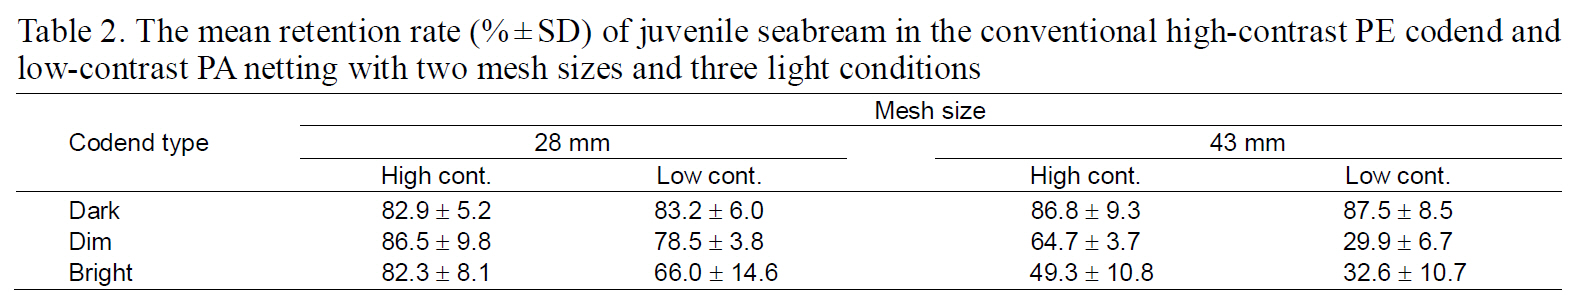 The mean retention rate (%±SD) of juvenile seabream in the conventional high-contrast PE codend and low-contrast PA netting with two mesh sizes and three light conditions